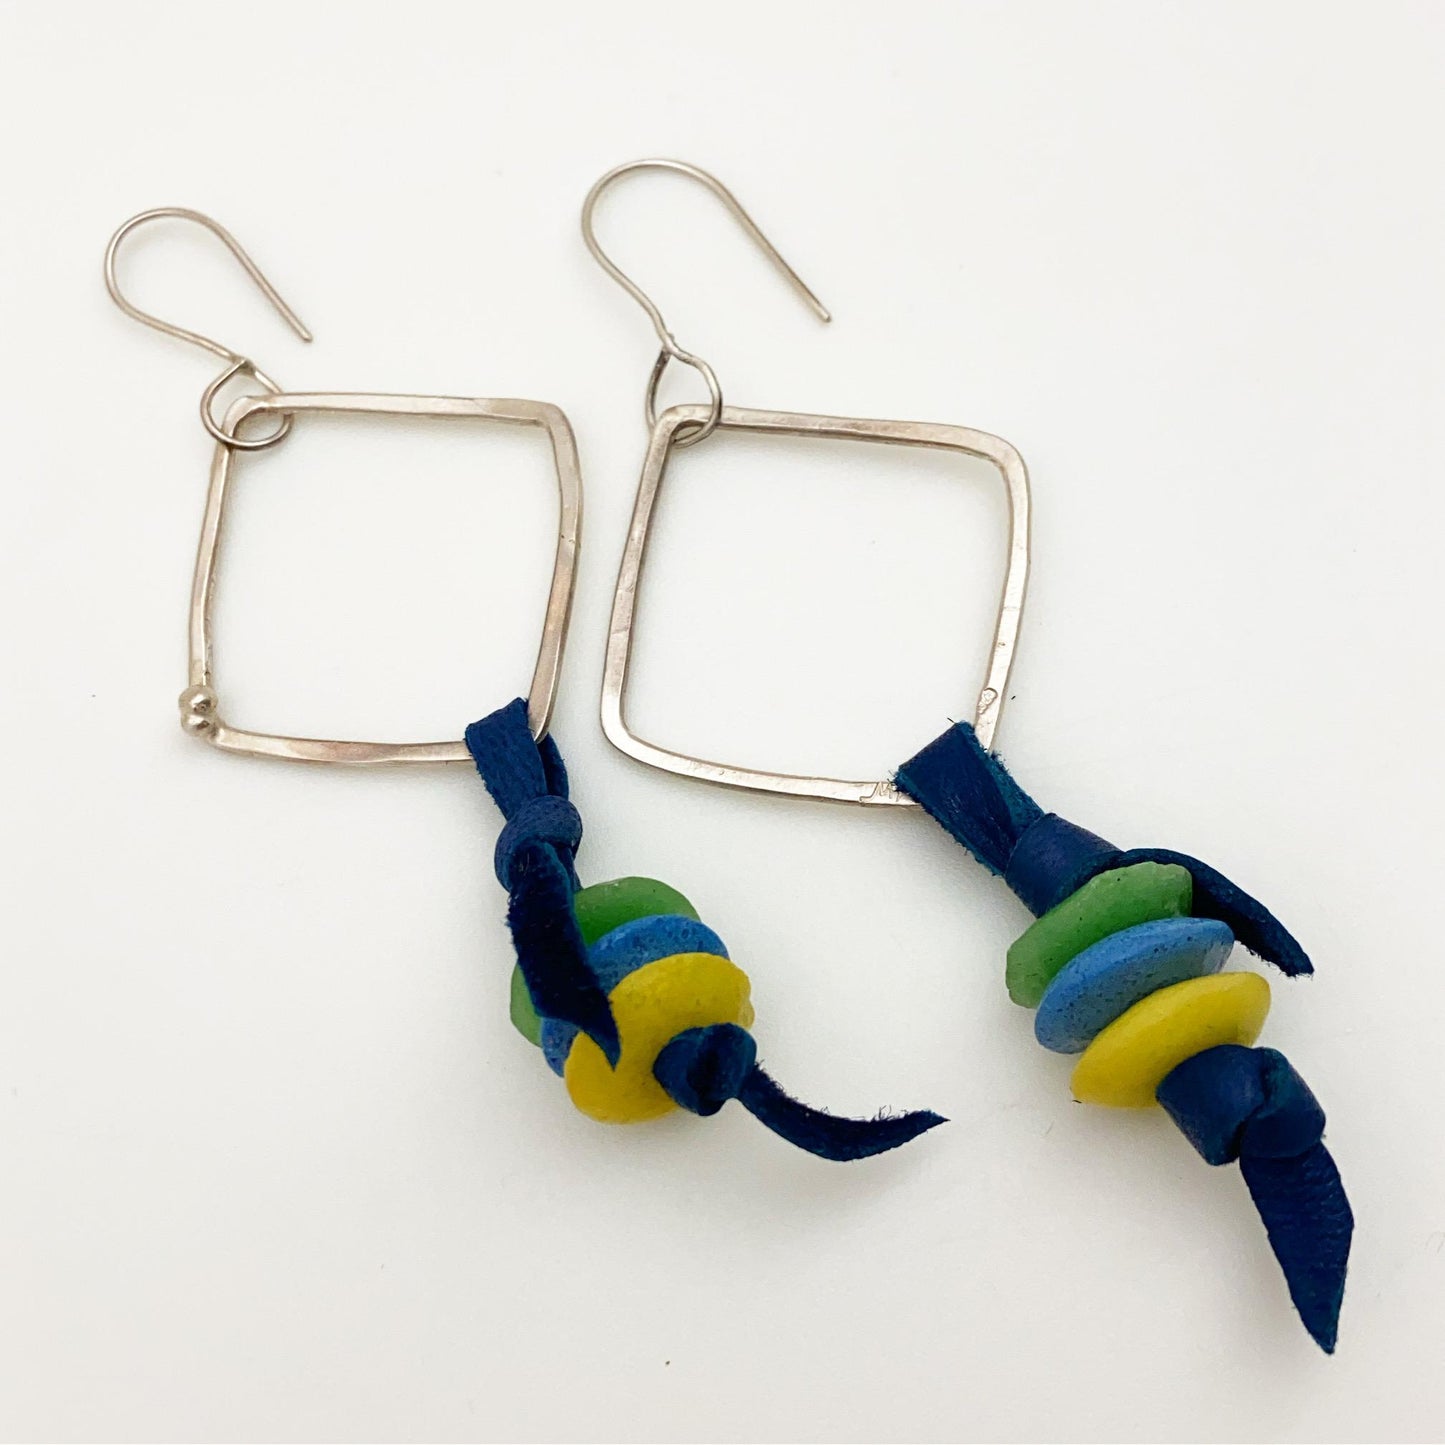 Earrings - Blue/Lime/Green Beads on Leather - Sterling Hoops